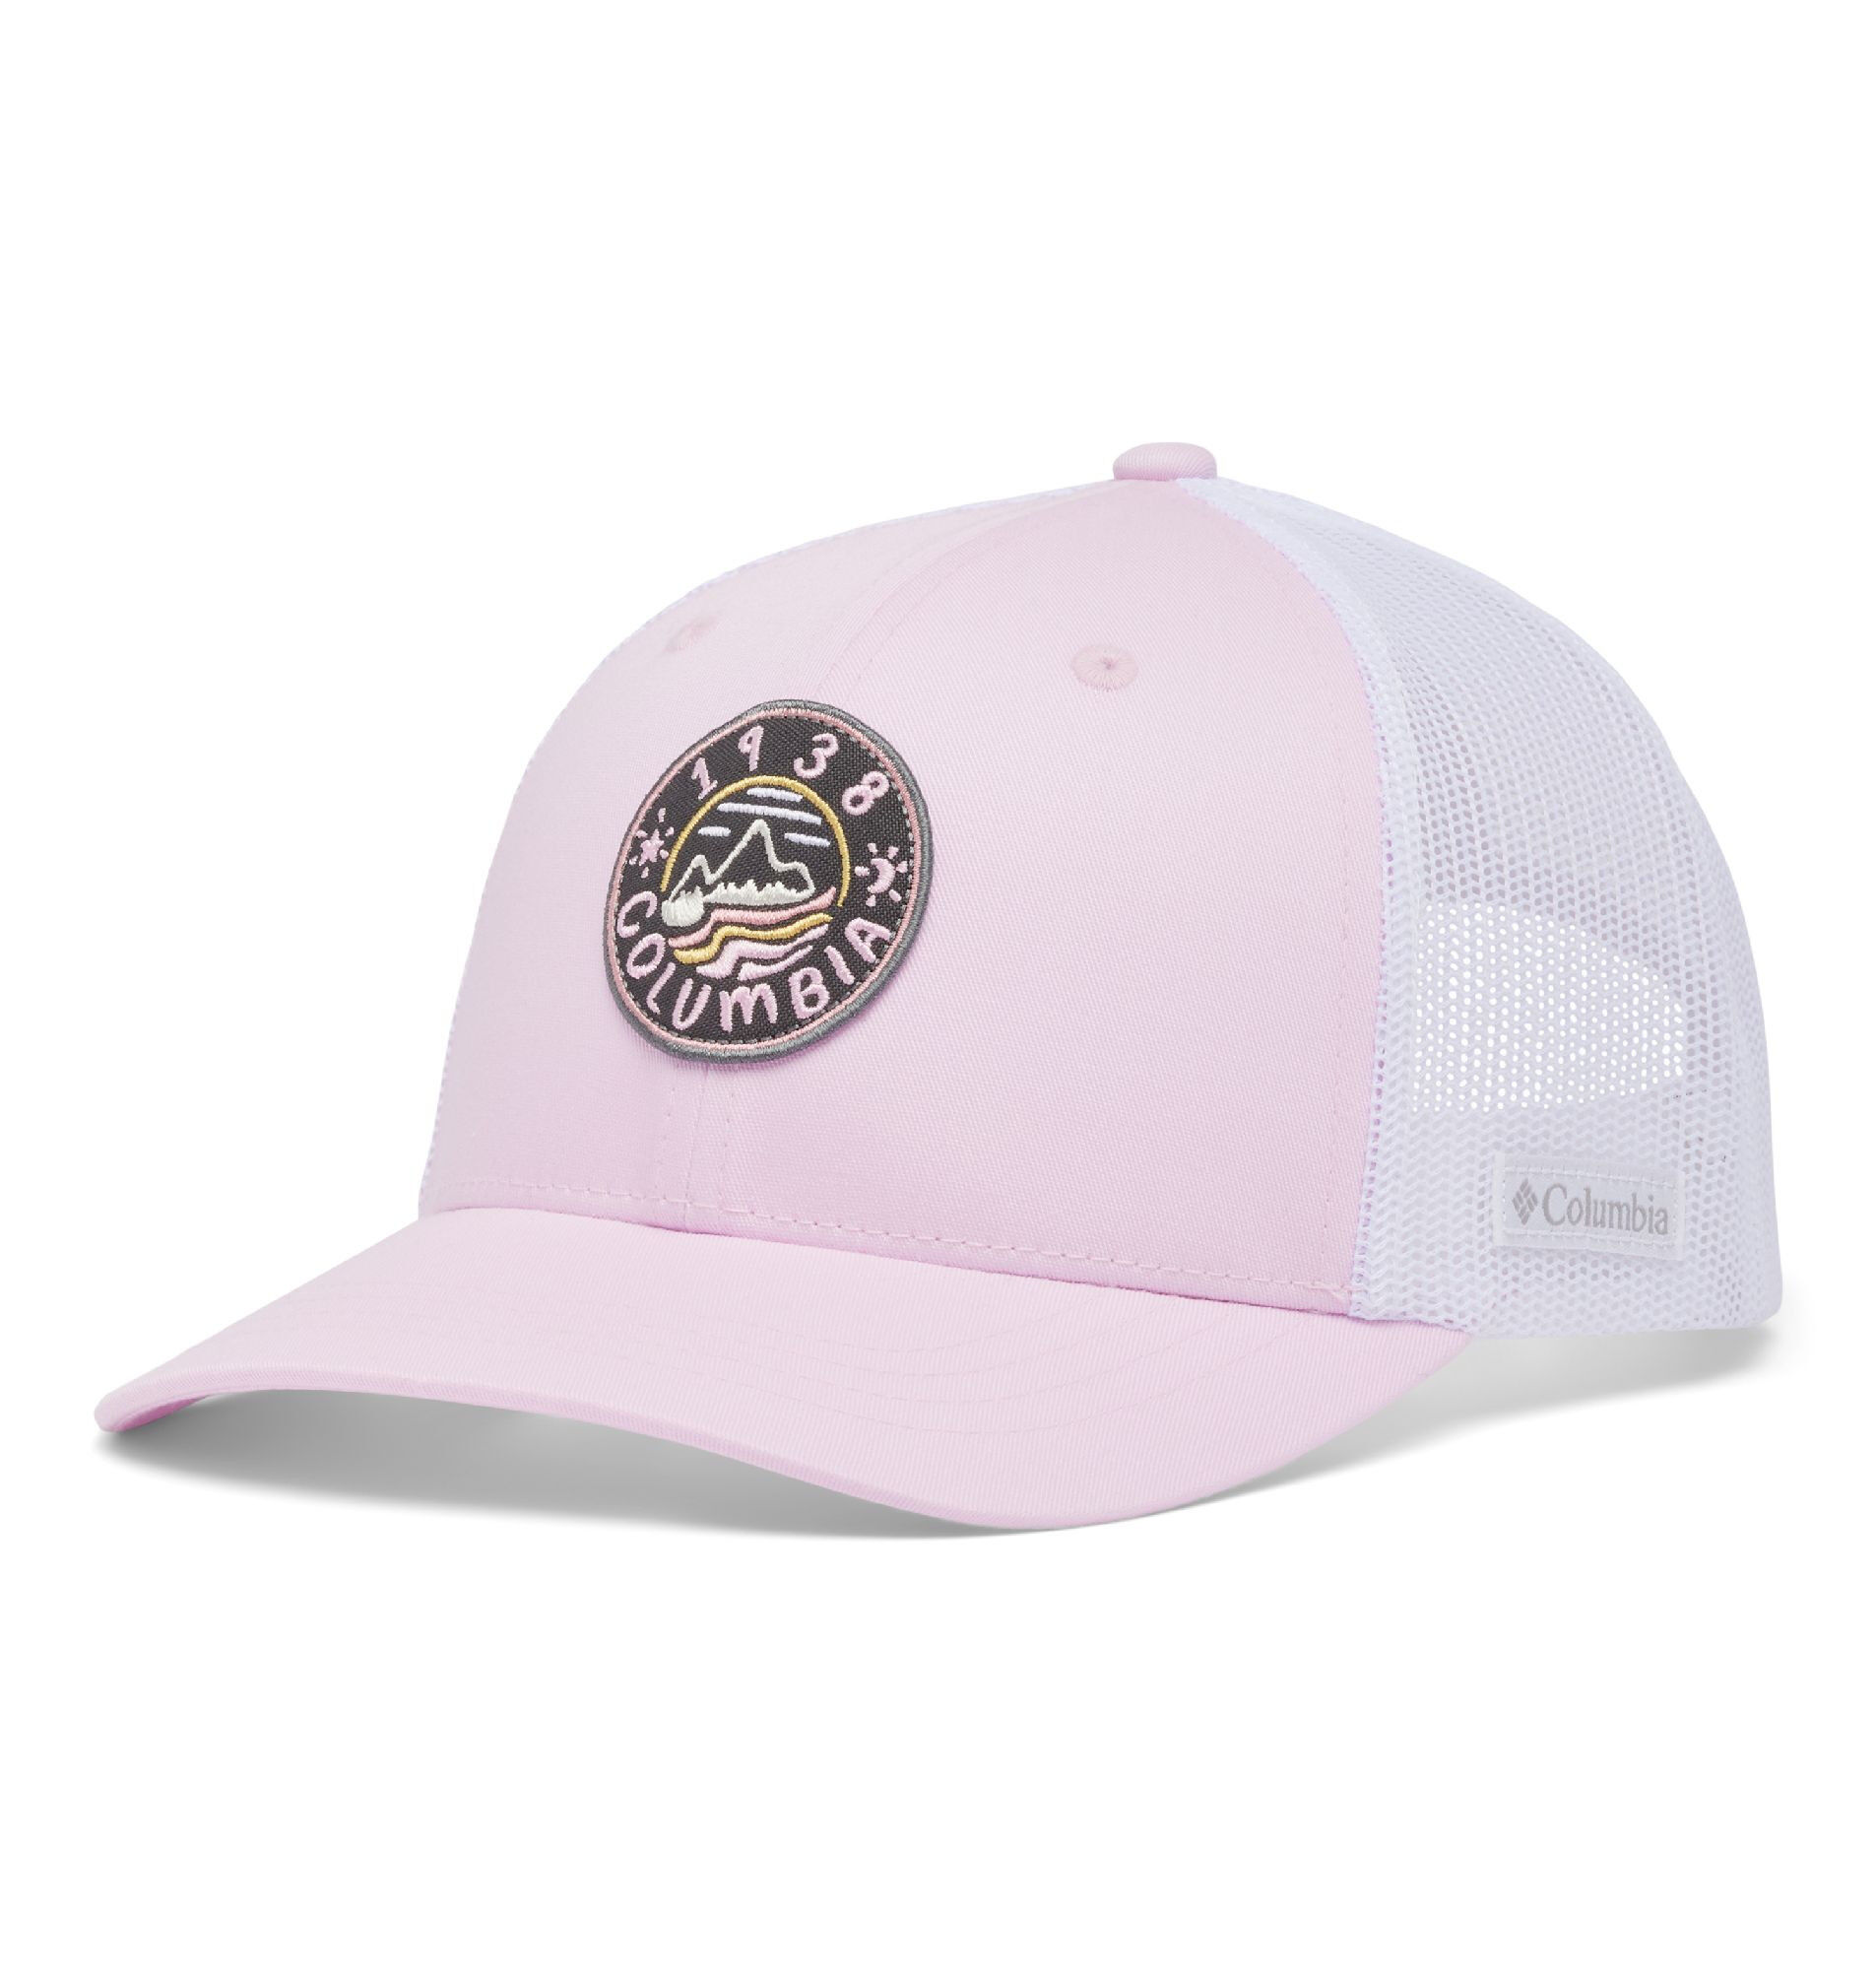 Columbia Youth Snap Back - Cap - Kid's